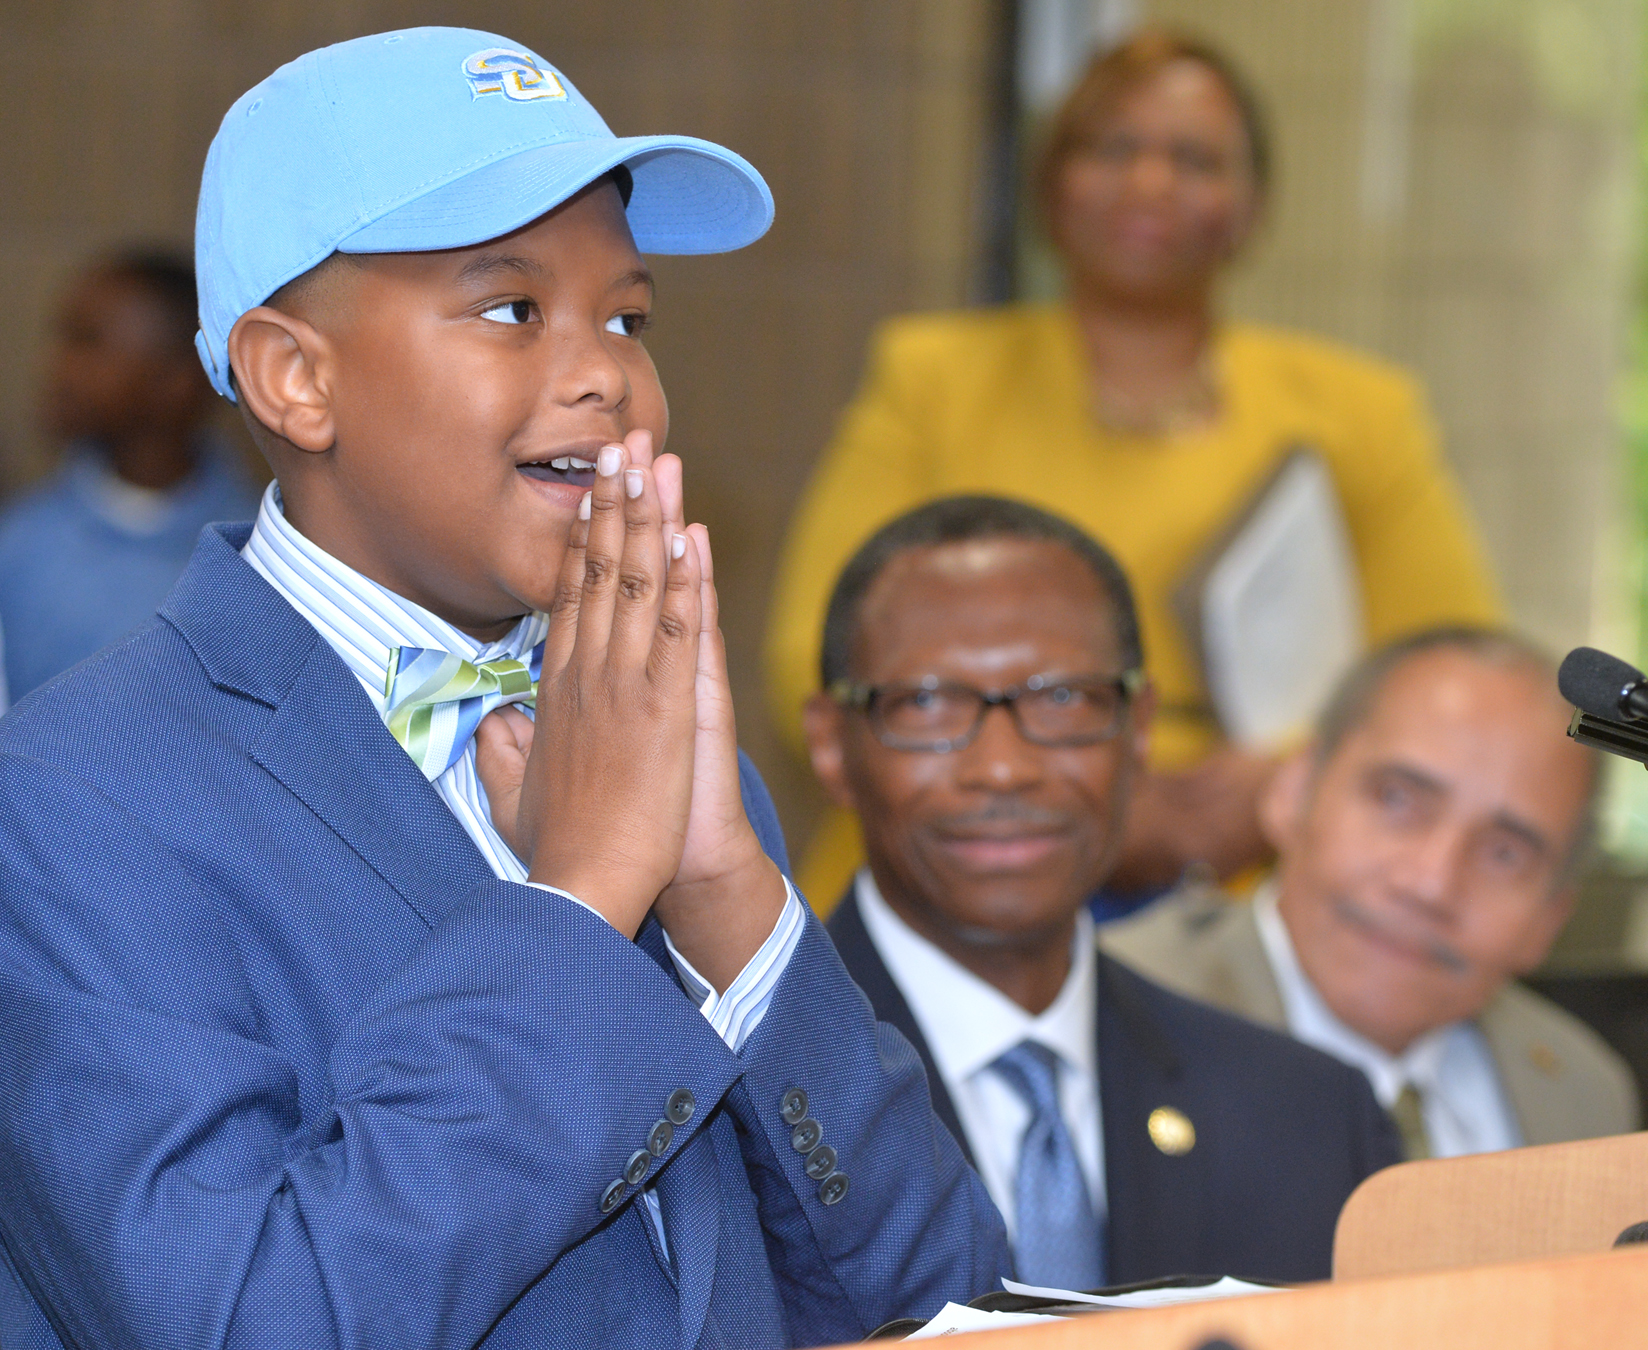 Southern University Welcomes 11-Year-Old Physics Prodigy